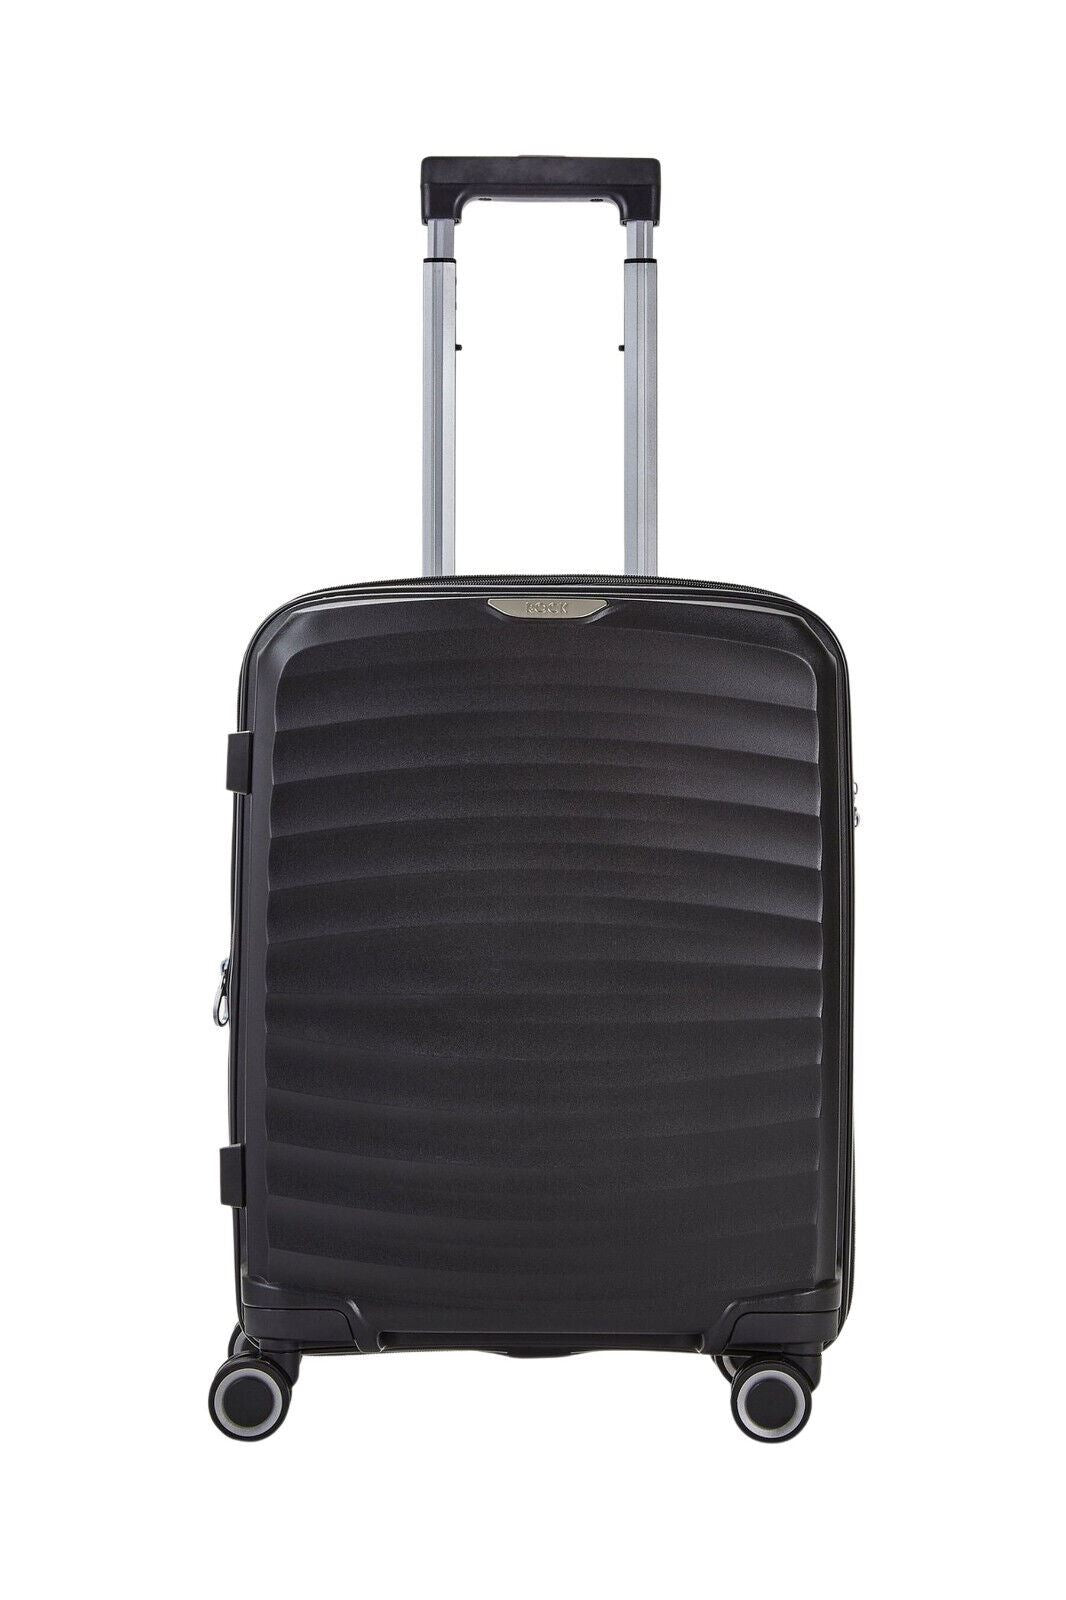 Hard Shell Classic Suitcase 8 Wheel Cabin Luggage Trolley Travel Bag - Upperclass Fashions 